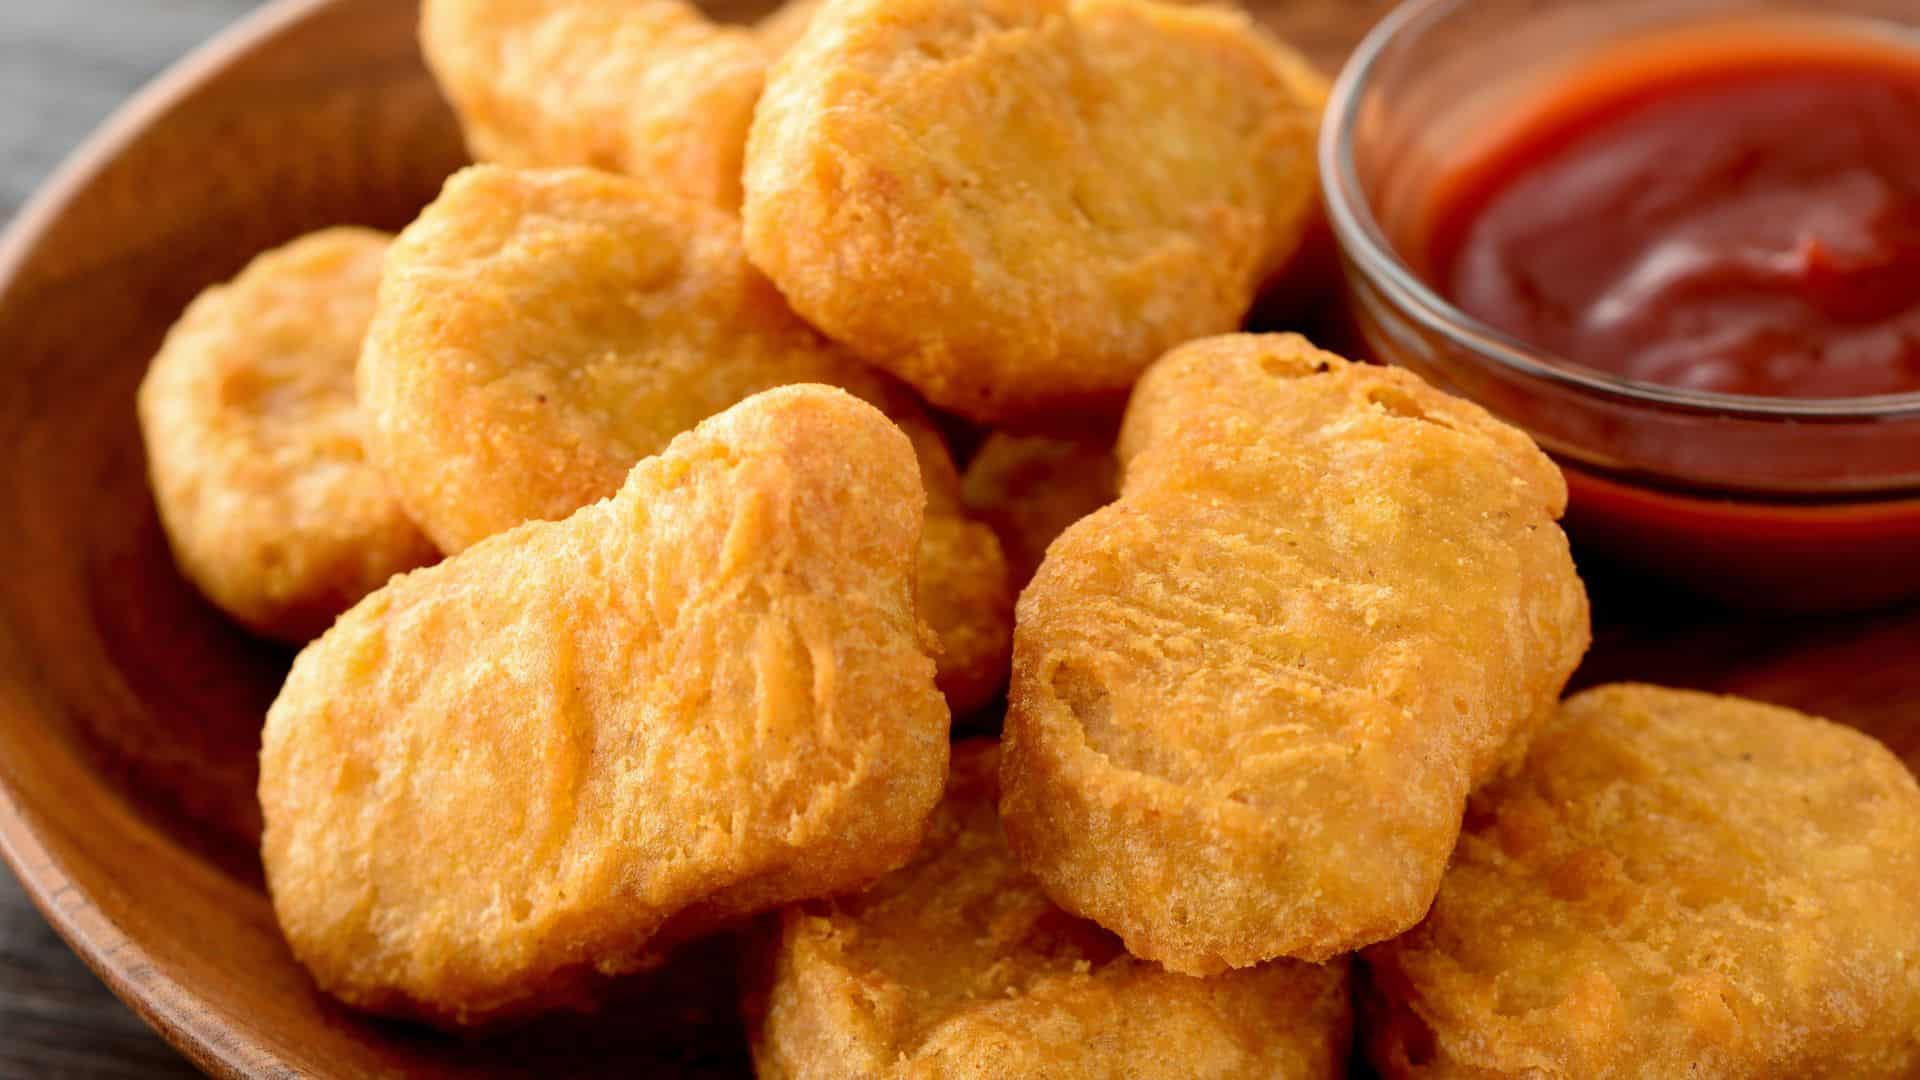 <p>You might think McDonald's nuggies are easy to make at home, but they’re actually quite complex to nail down.</p><p>This is because McD uses white meat chicken from the breast and wings. This part of the chicken is lean and has a light flavor. However, it also dries out quickly, so it’s incredibly hard to get right.</p><p>The chicken is ground, marinated with spices, shaped, and breaded before being popped into hot oil. Yum!</p>